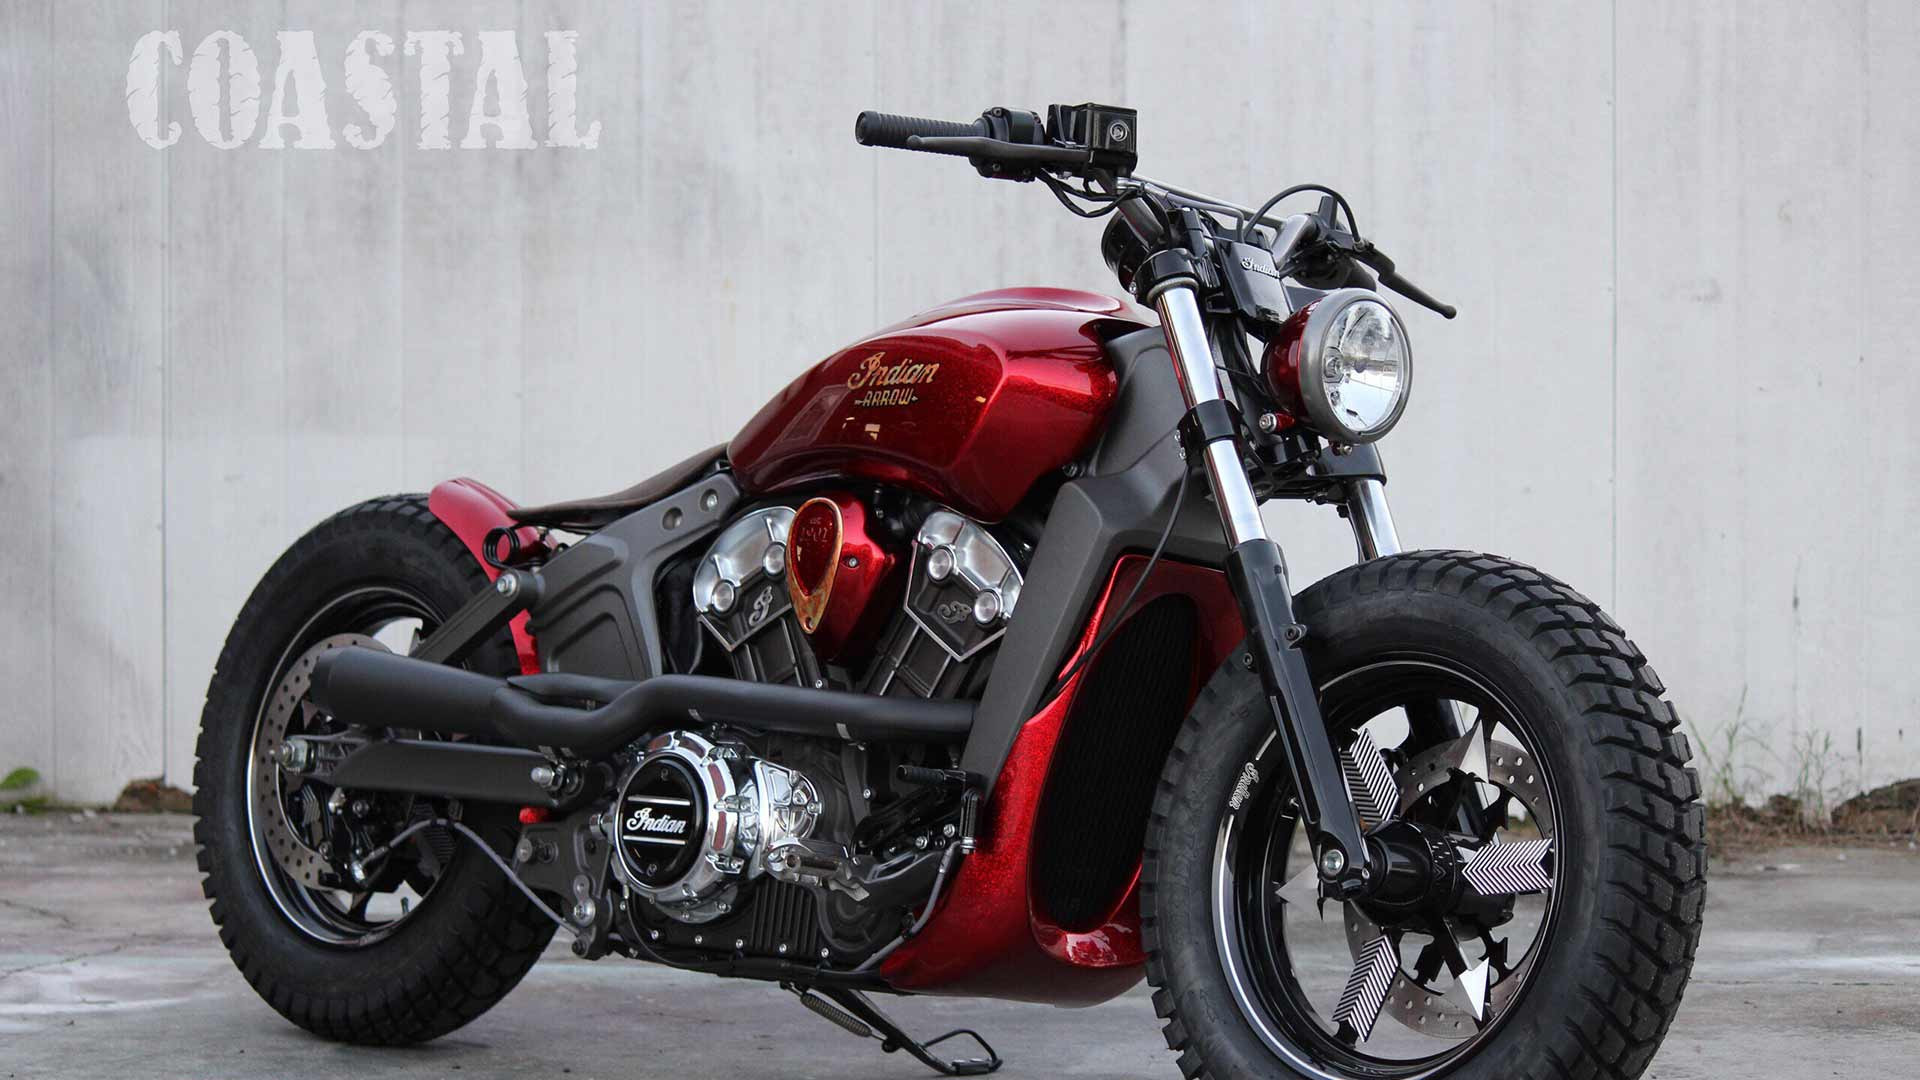 1920x1080 Indian Scout Bobber Wallpaper Amazing Indian Scout Wallpapers Vehicles Hq  Indian Scout